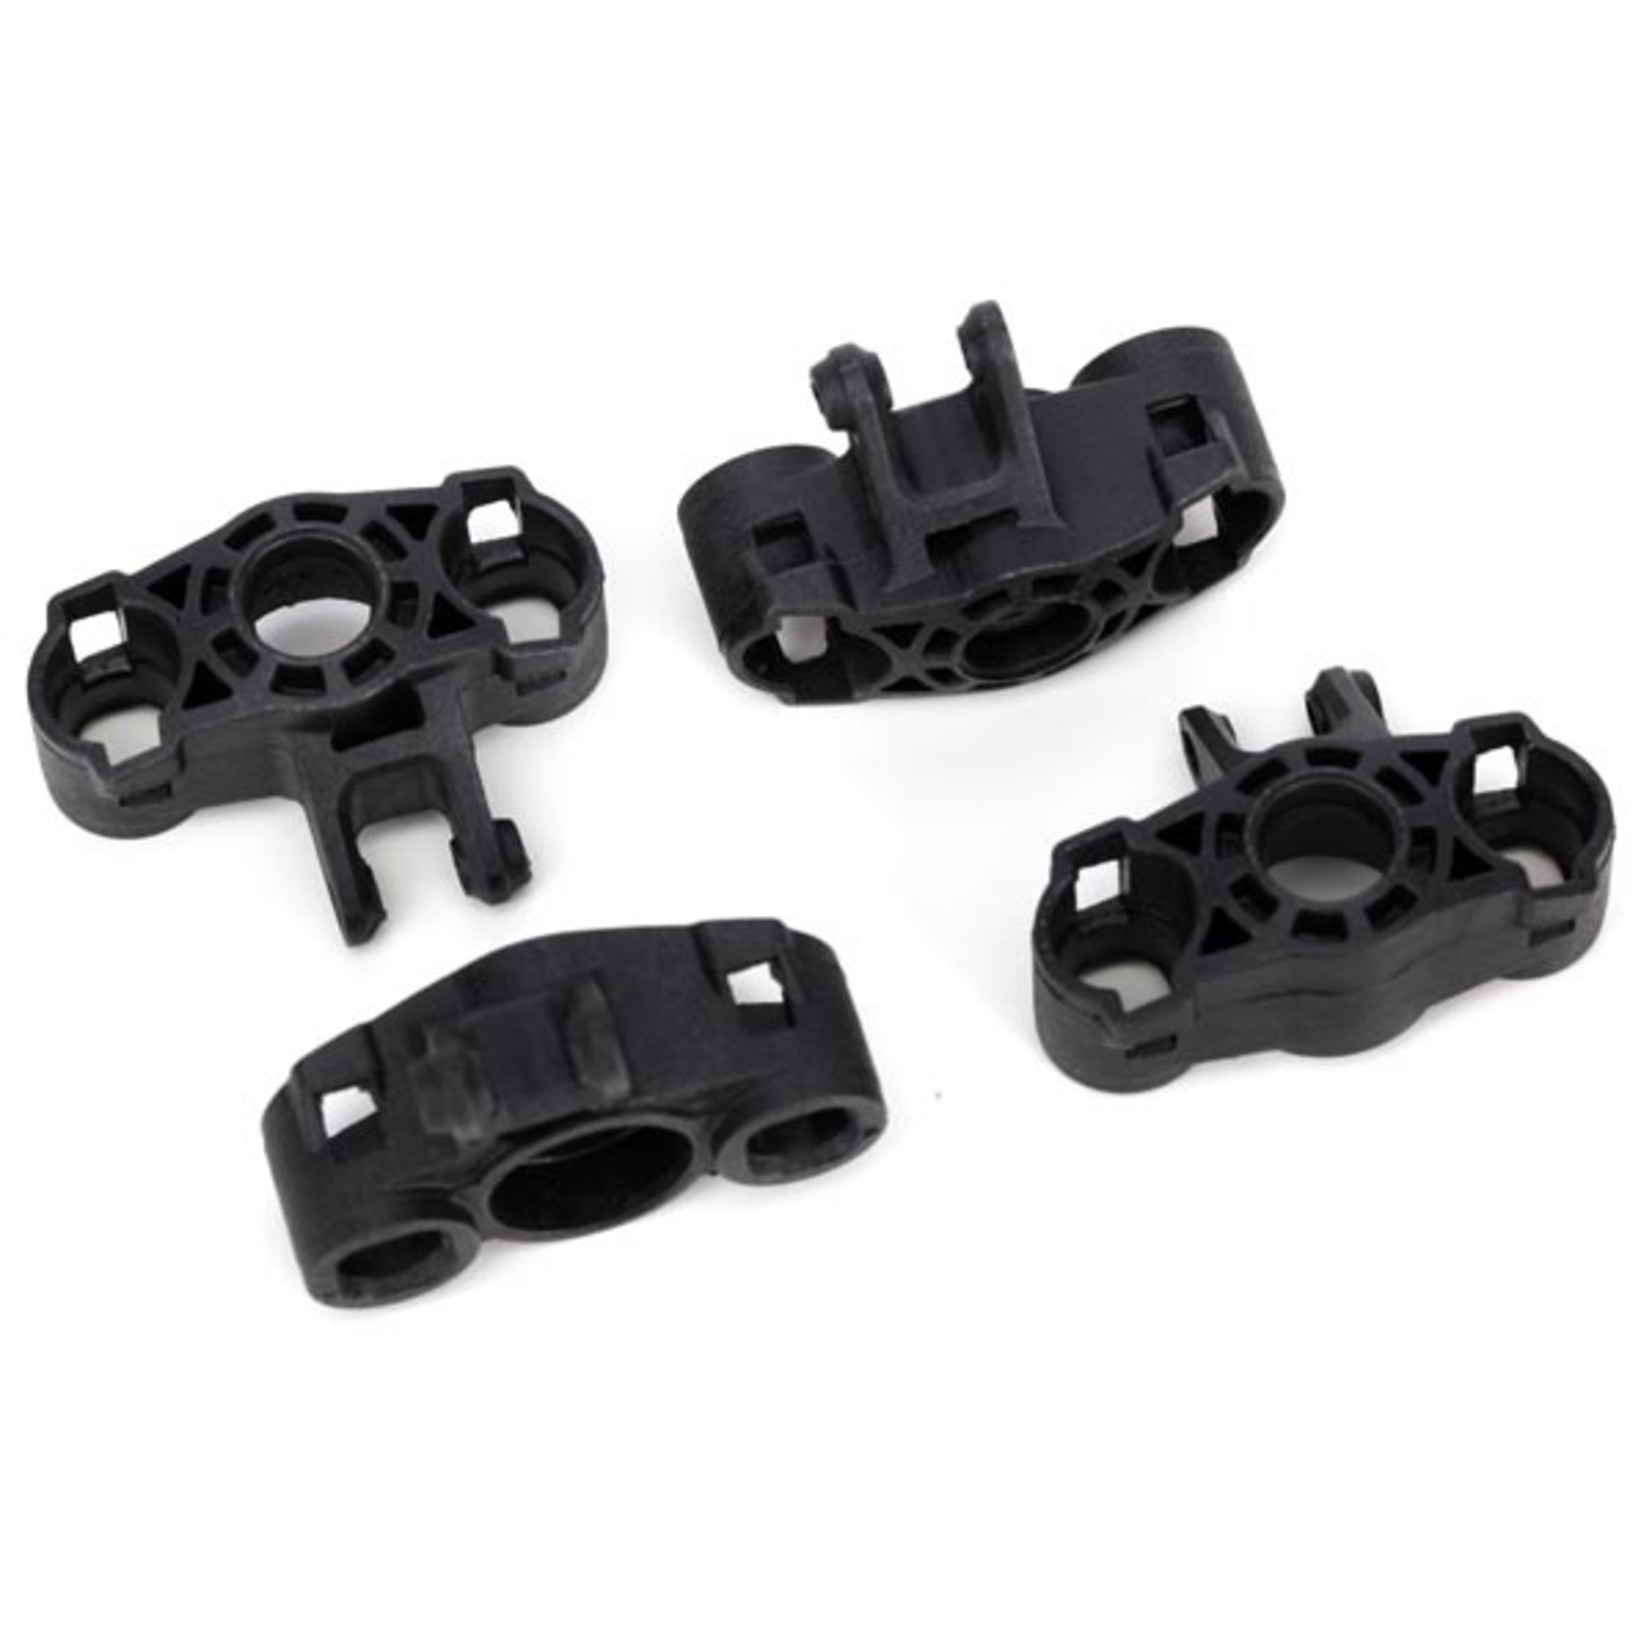 Traxxas 7034 - Axle carriers, left & right (2 each)